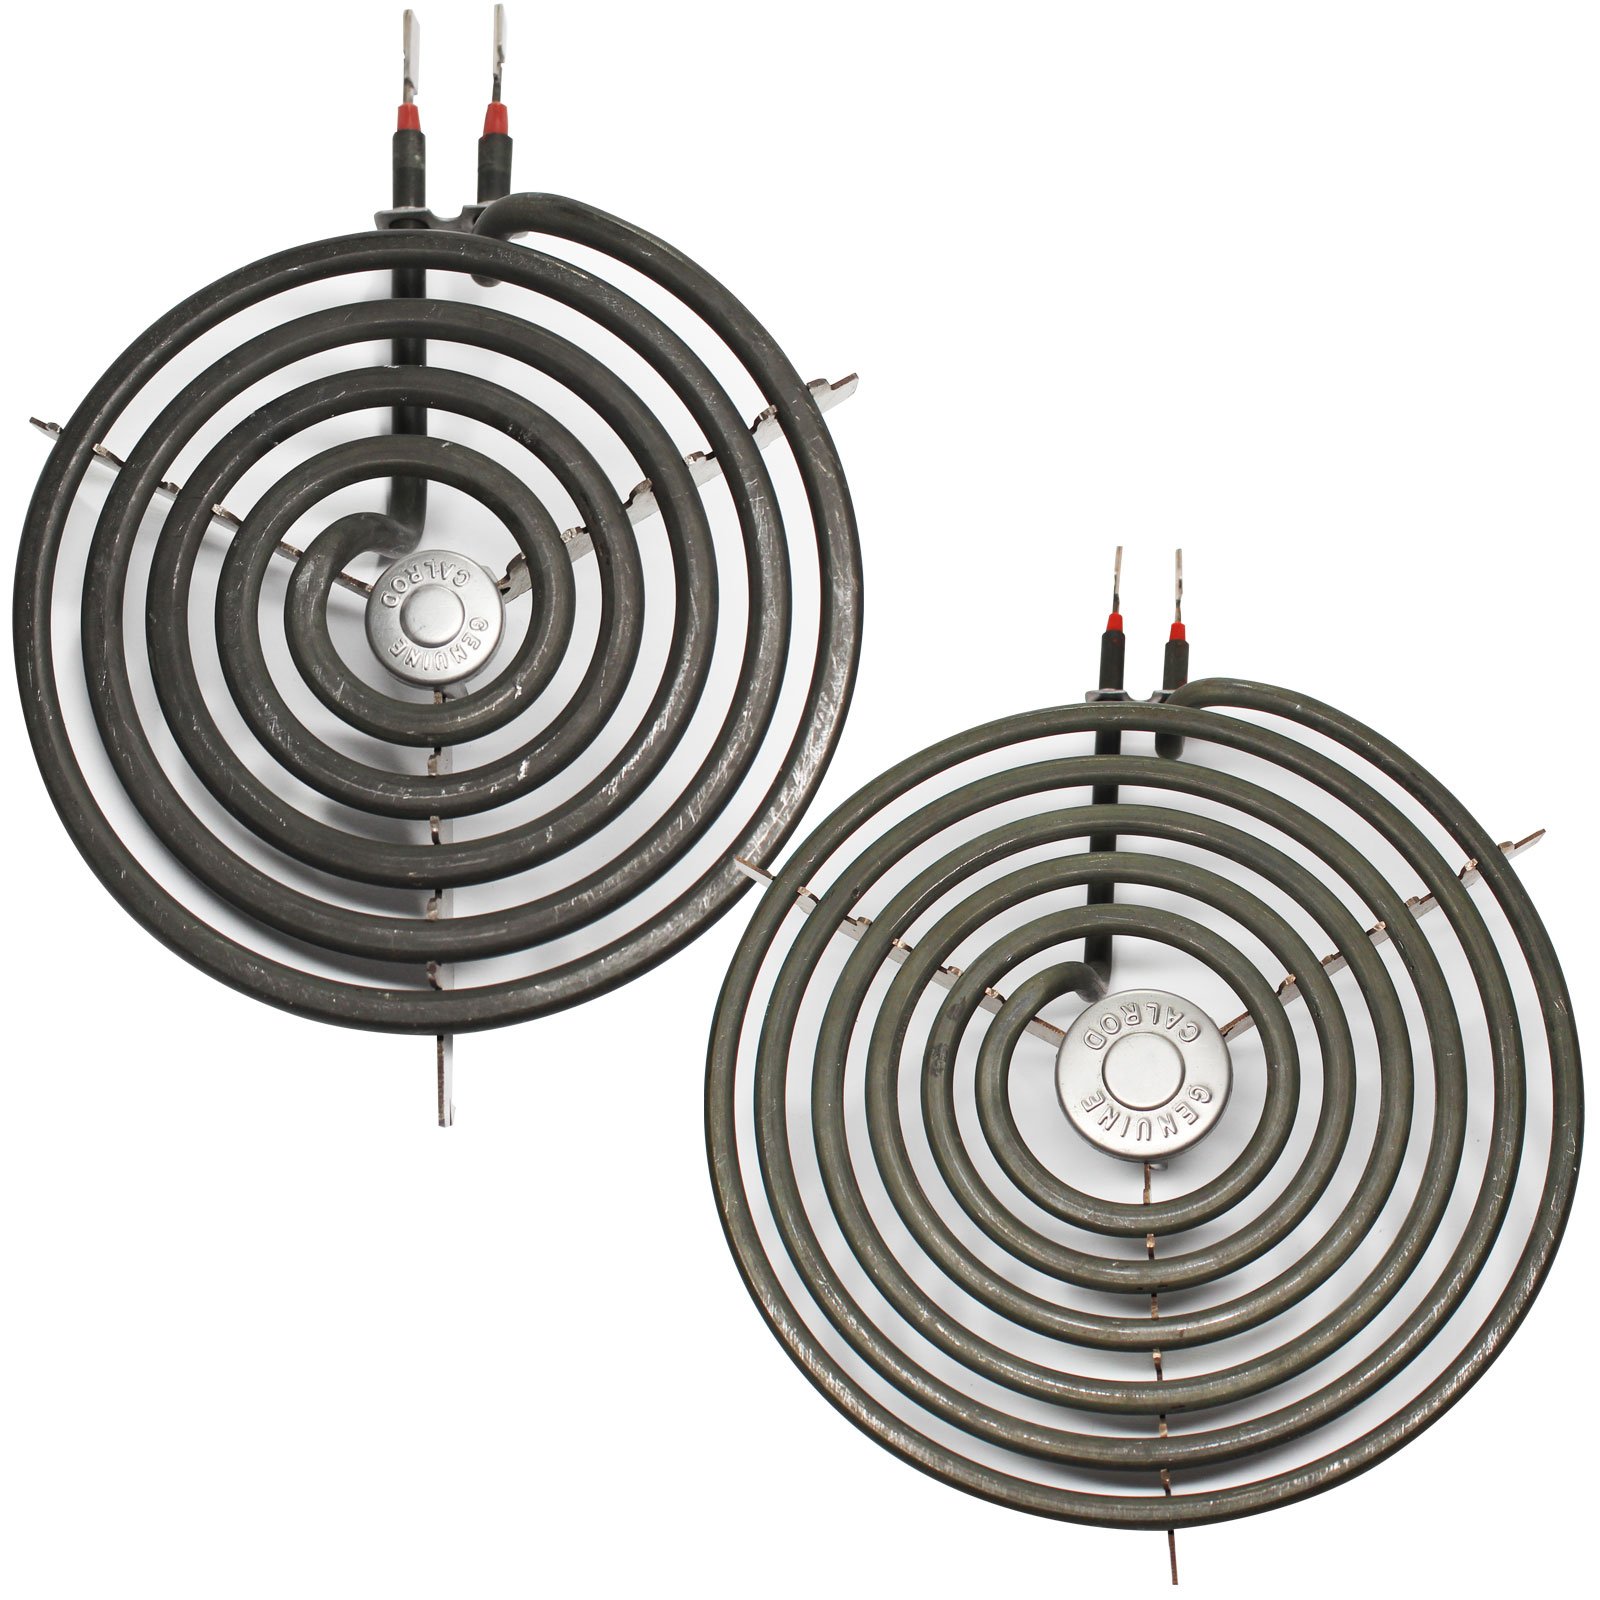 Compatible General Electric JP383B9R1BC 8 inch 6 Turns & 6 inch 5 Turns Surface Burner Elements - Compatible General Electric WB30M1 & WB30M2 Heating Element for Range, Stove & Cooktop - image 1 of 4